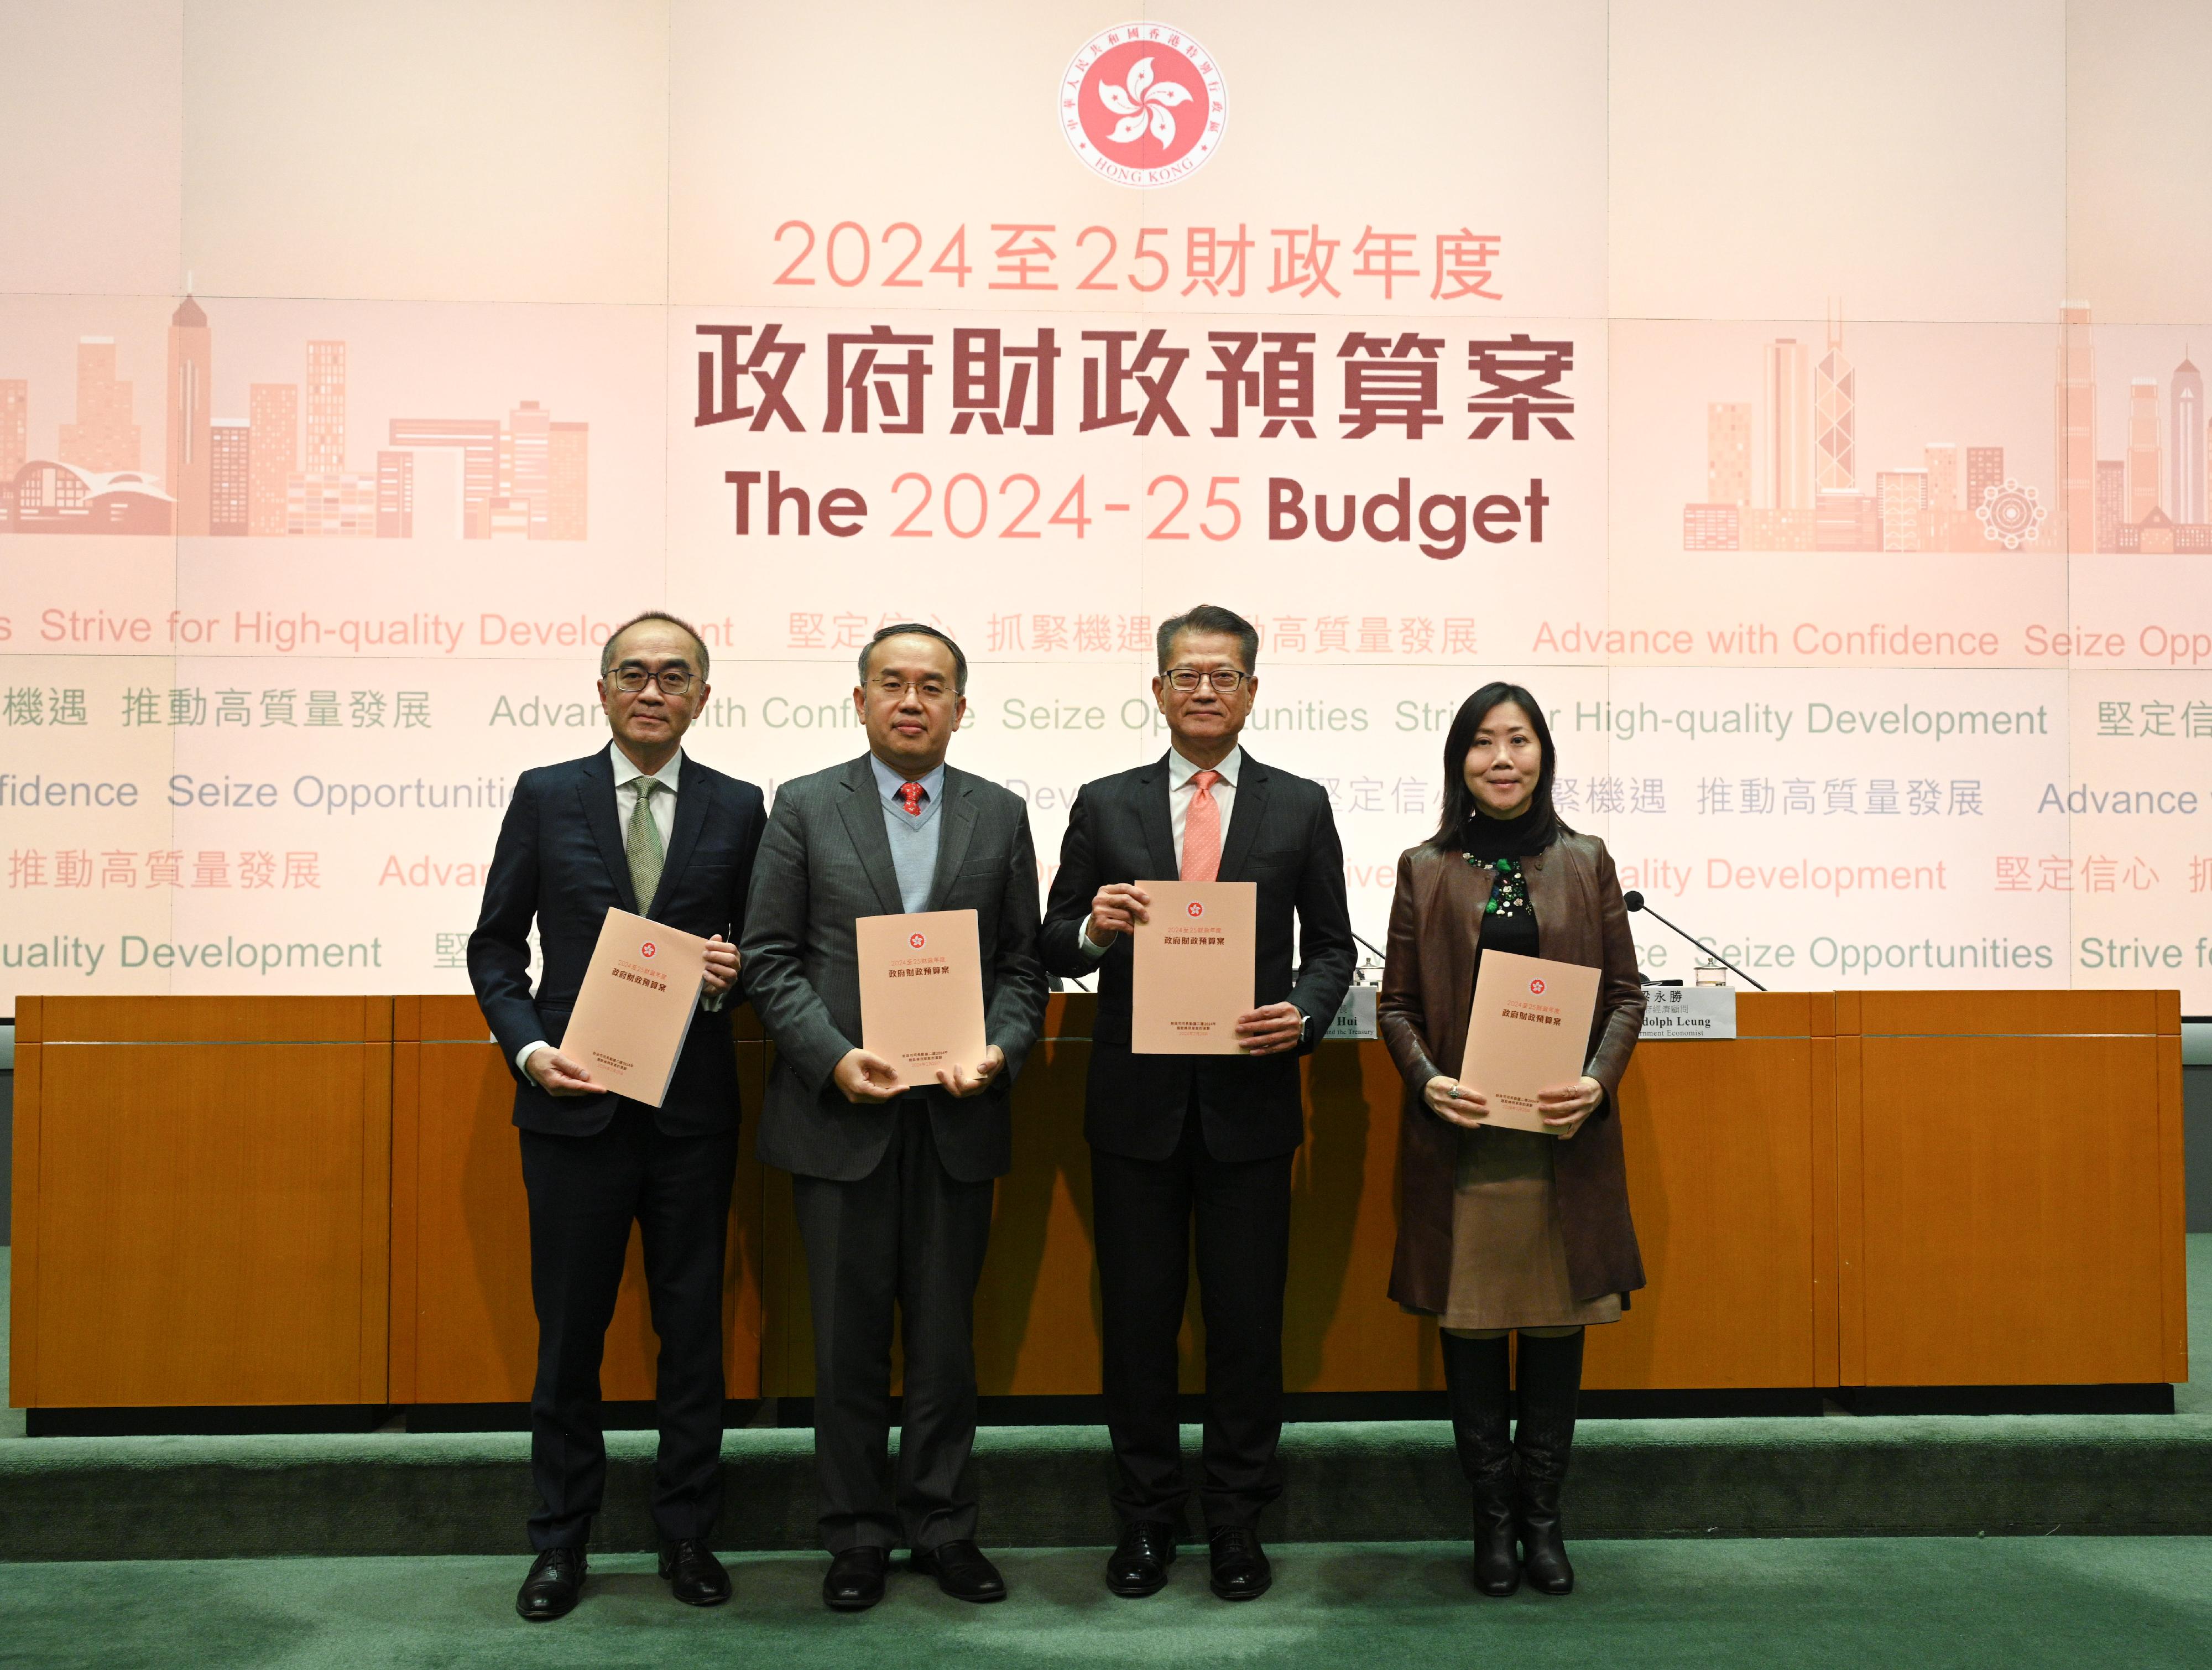 The Financial Secretary, Mr Paul Chan (second right), holds a press conference on the 2024-25 Budget this afternoon (February 28) at the Central Government Offices in Tamar. Also in attendance are the Secretary for Financial Services and the Treasury, Mr Christopher Hui (second left); the Permanent Secretary for Financial Services and the Treasury (Treasury), Miss Cathy Chu (first right); and the Government Economist, Mr Adolph Leung (first left).